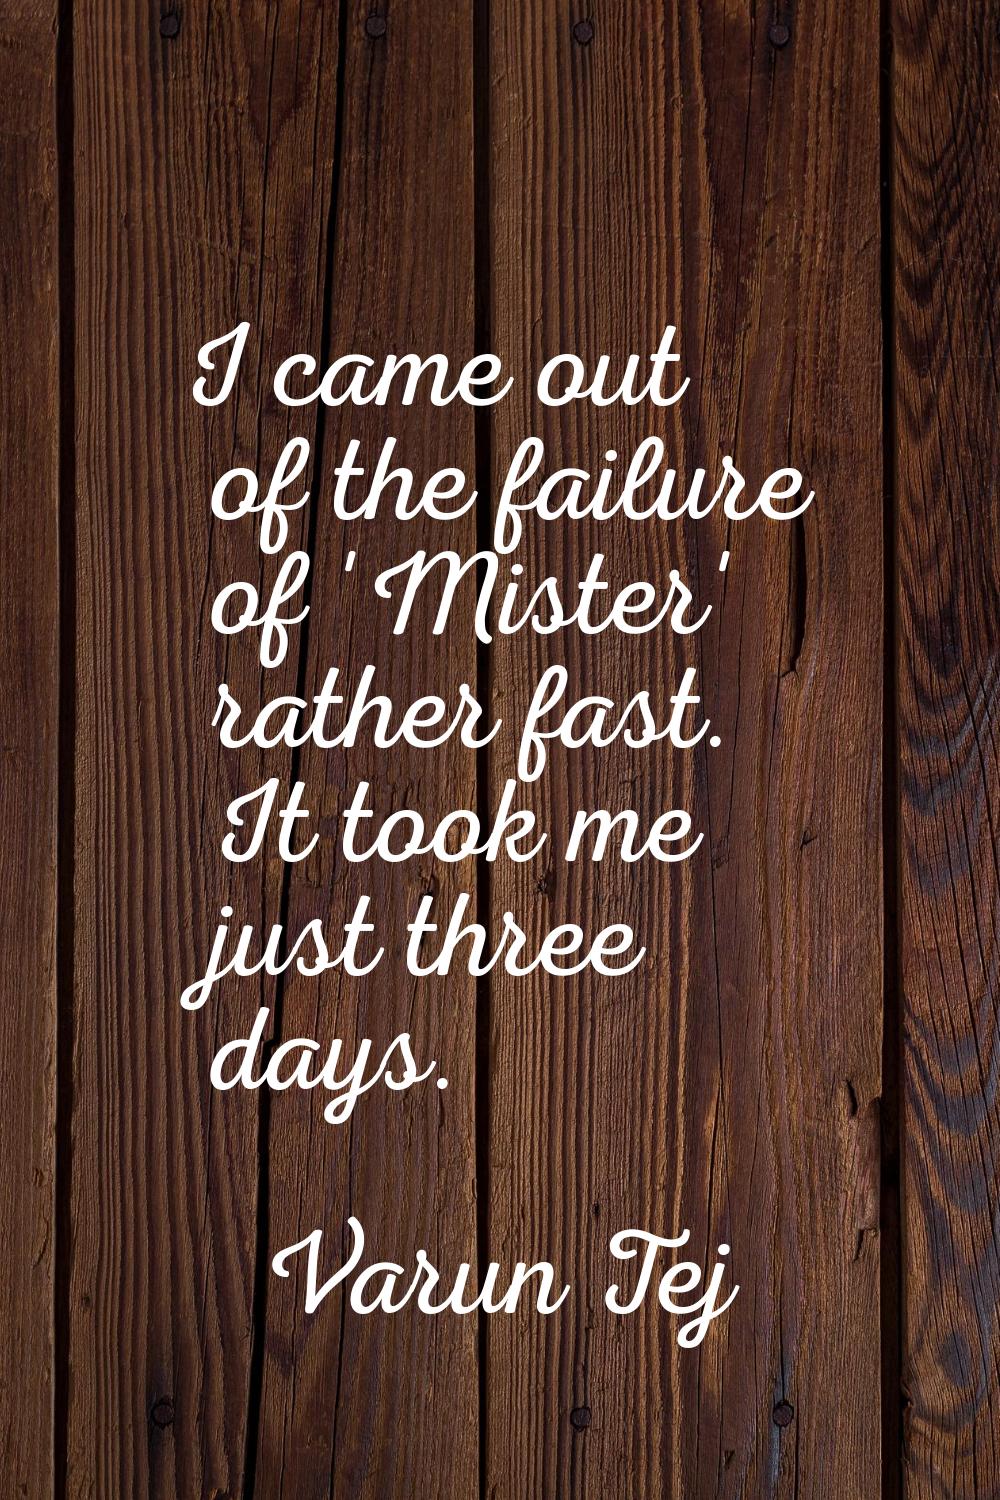 I came out of the failure of 'Mister' rather fast. It took me just three days.